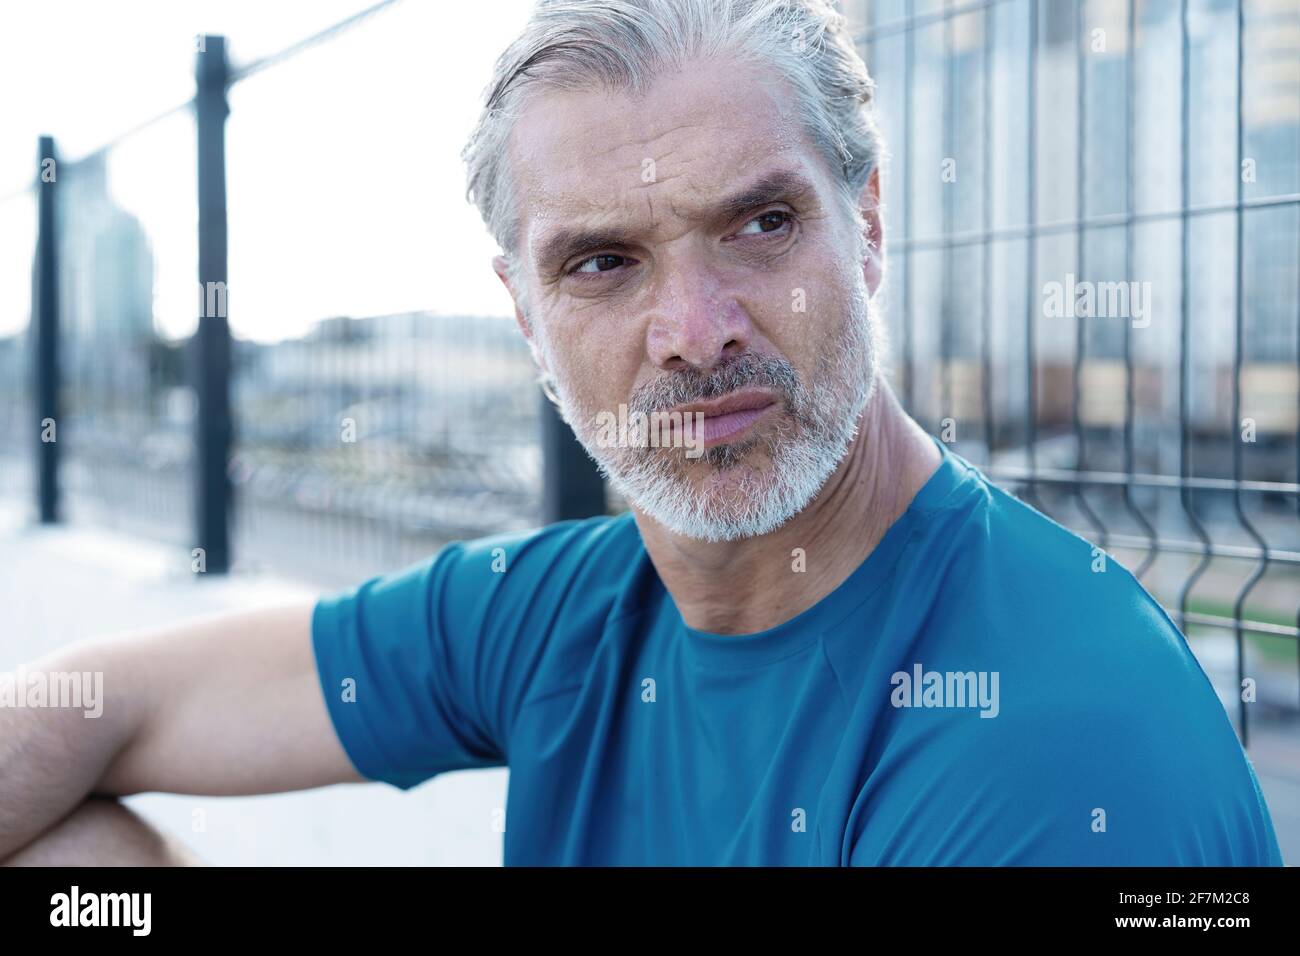 Tired Exhausted Middle-aged Man Resting After Running Outdoors. Handsome Runner Taking Break After Fitness Workout Stock Photo